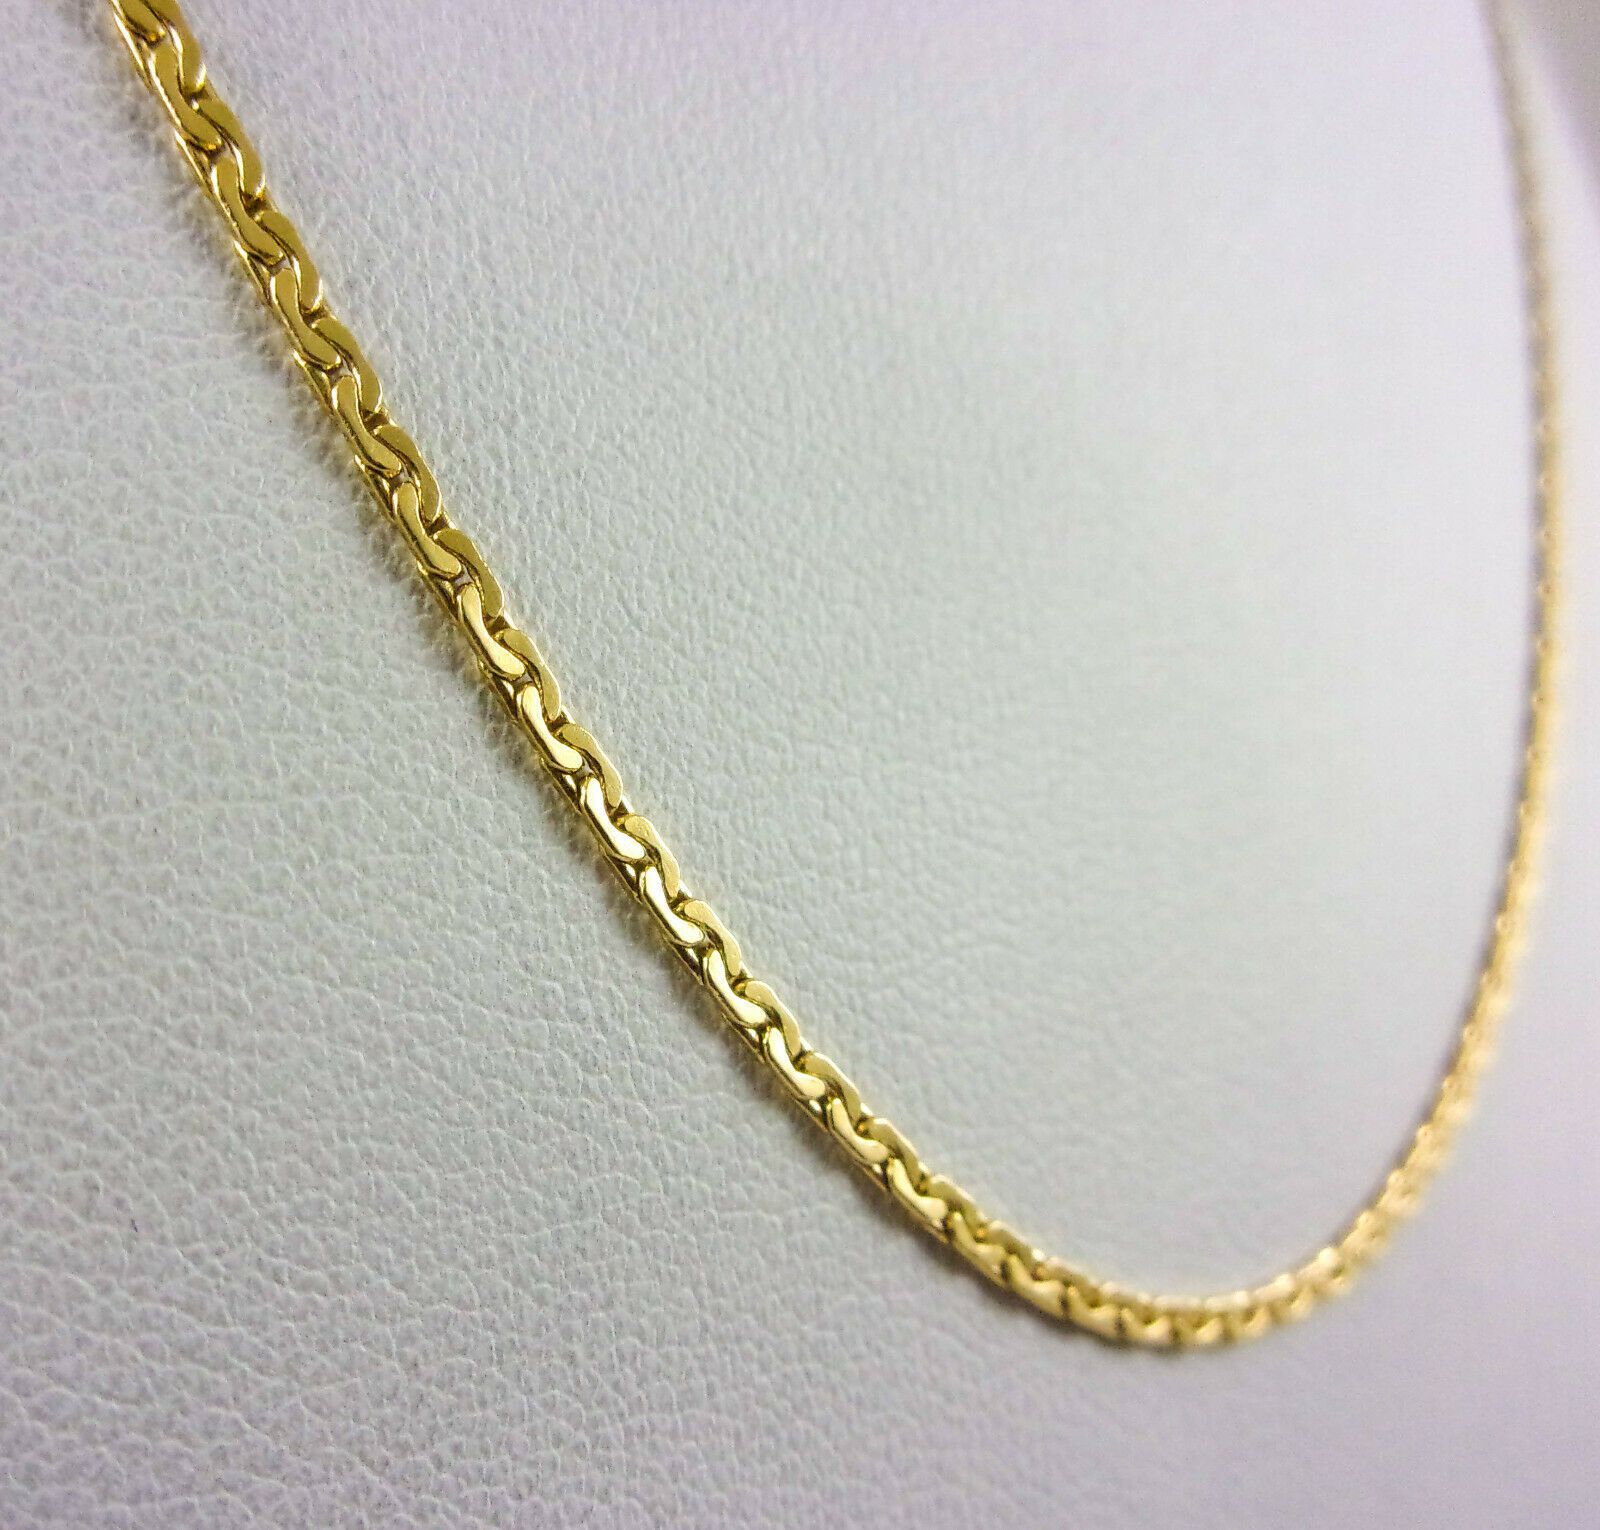 Solid 14k Yellow Gold 16" Tight Cable Link Chain Necklace, 1.5mm,  (View 22 of 25)